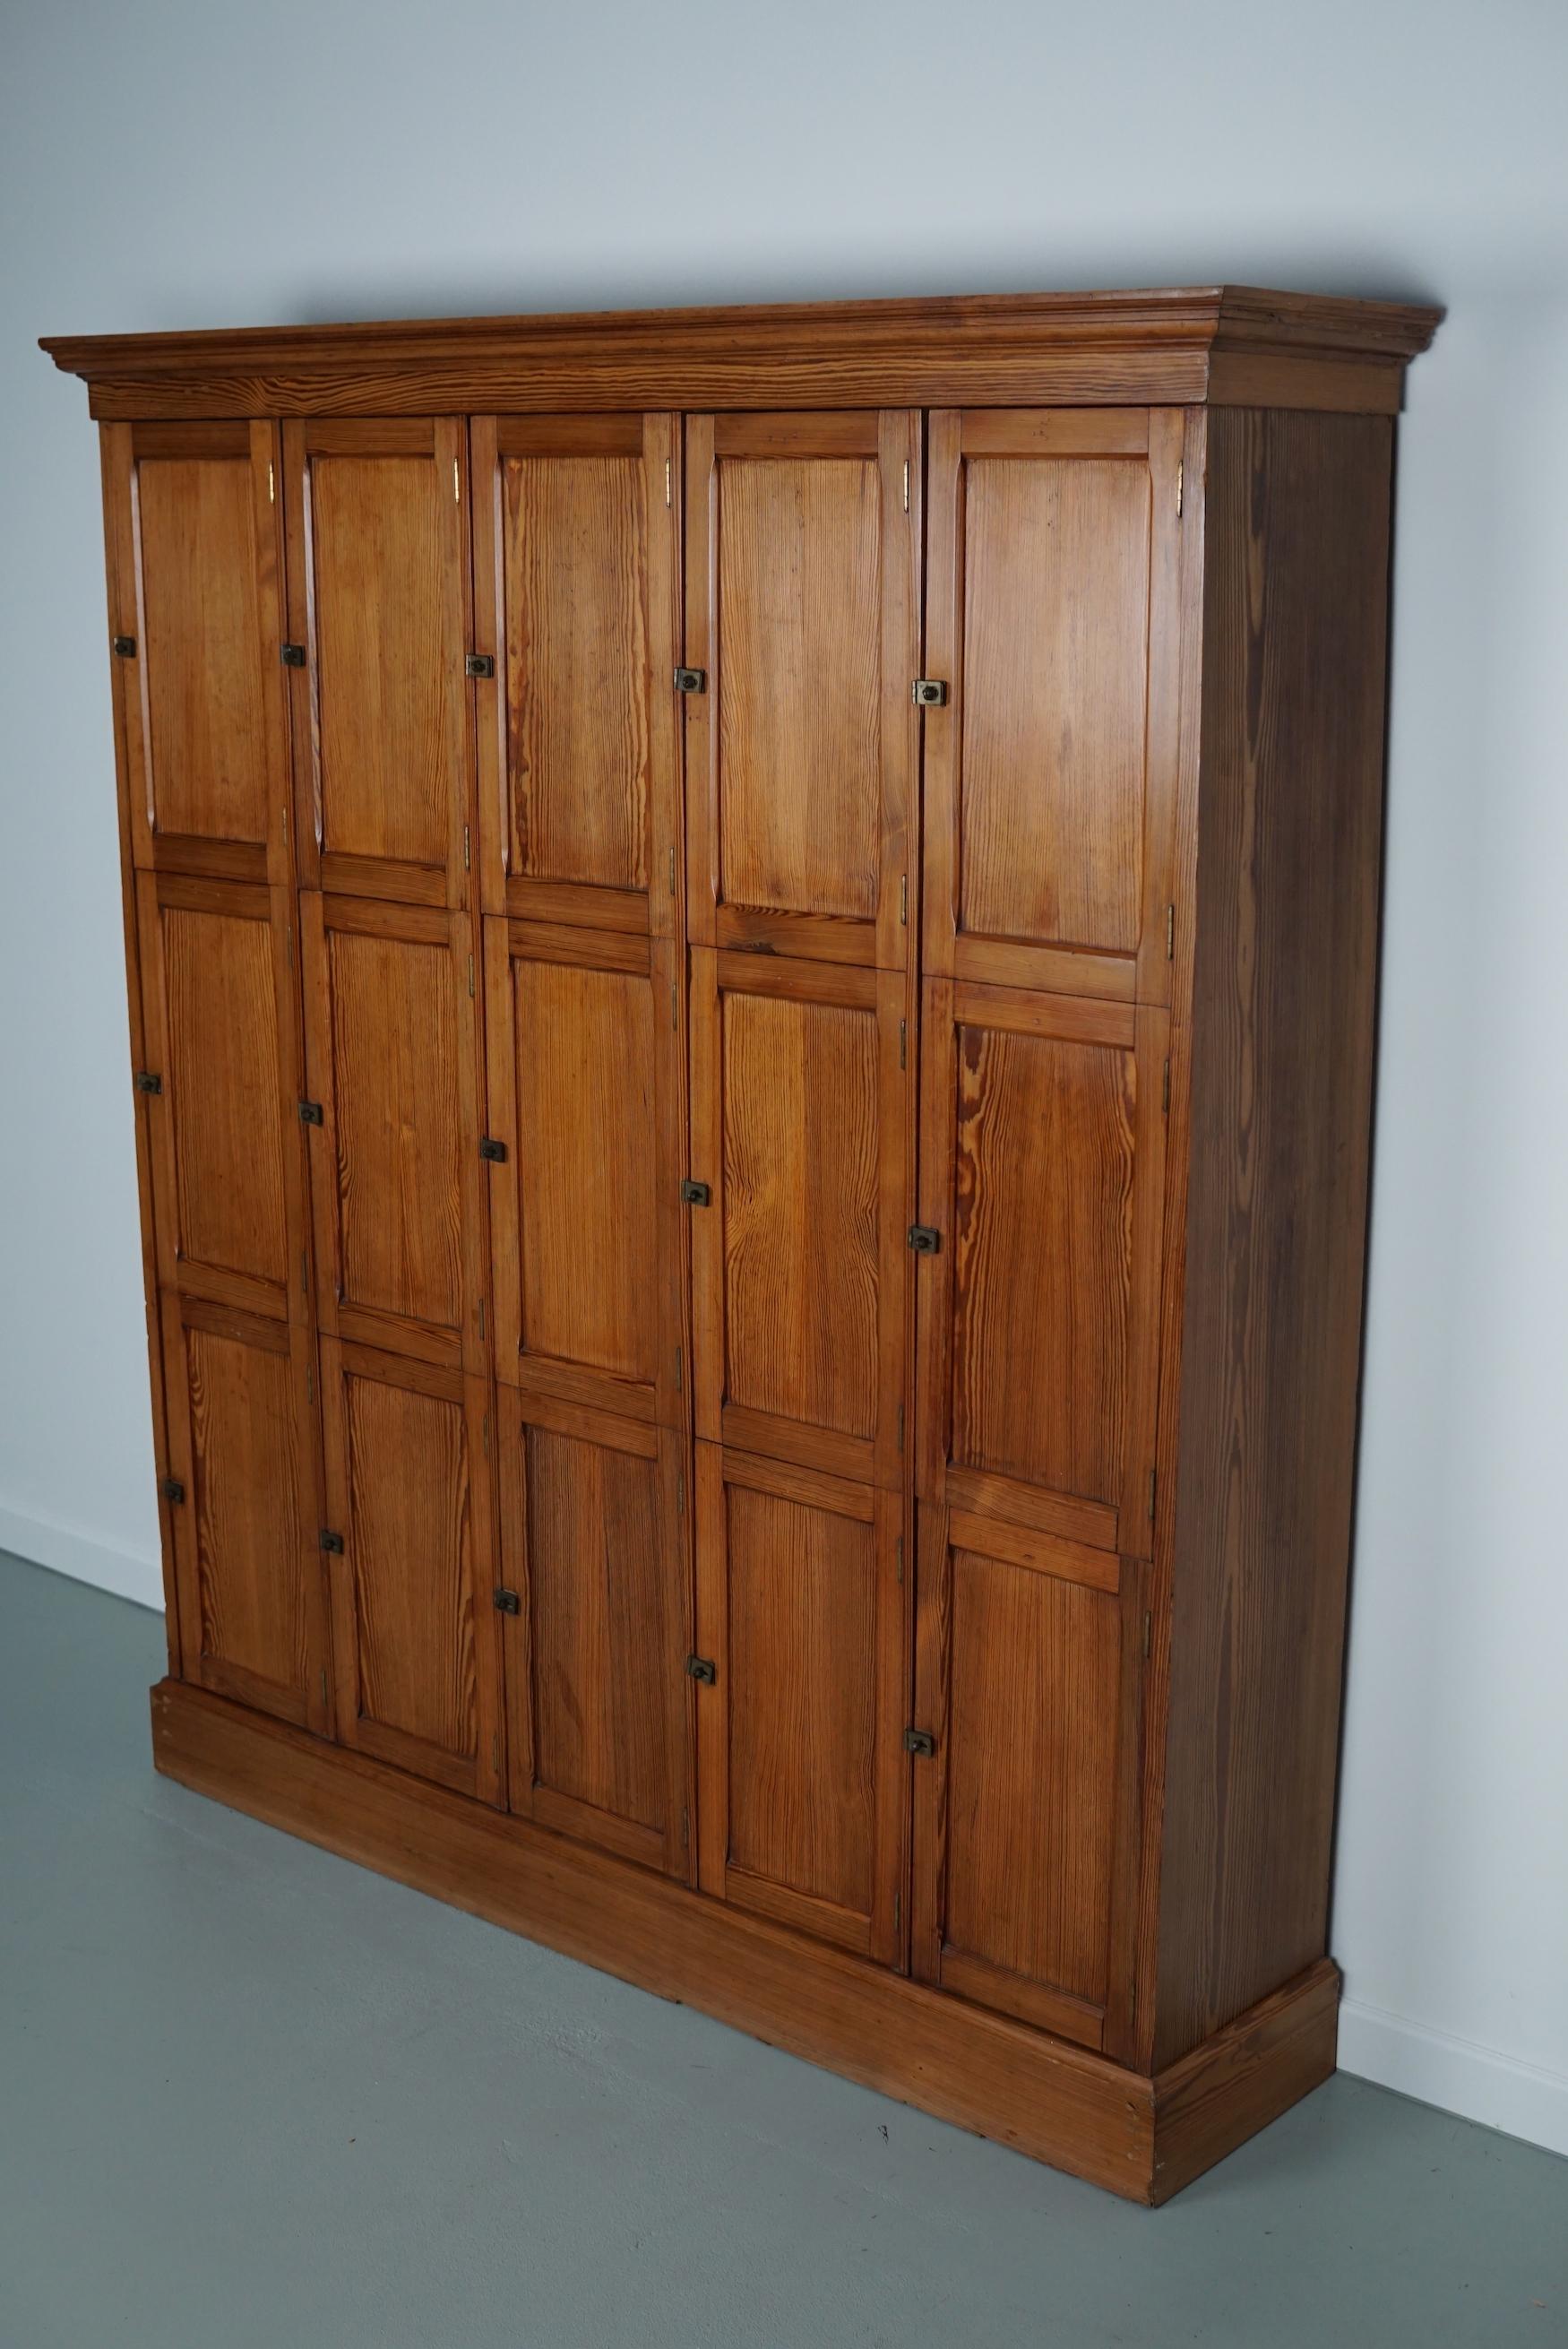 This Dutch pitch pine locker with 15 doors was made around the 1930s in the Netherlands. It was used in a church in the city of The Hague to store personal bibles from the priests. The interior dimensions of the compartments are: D W H 23 x 25 x 46